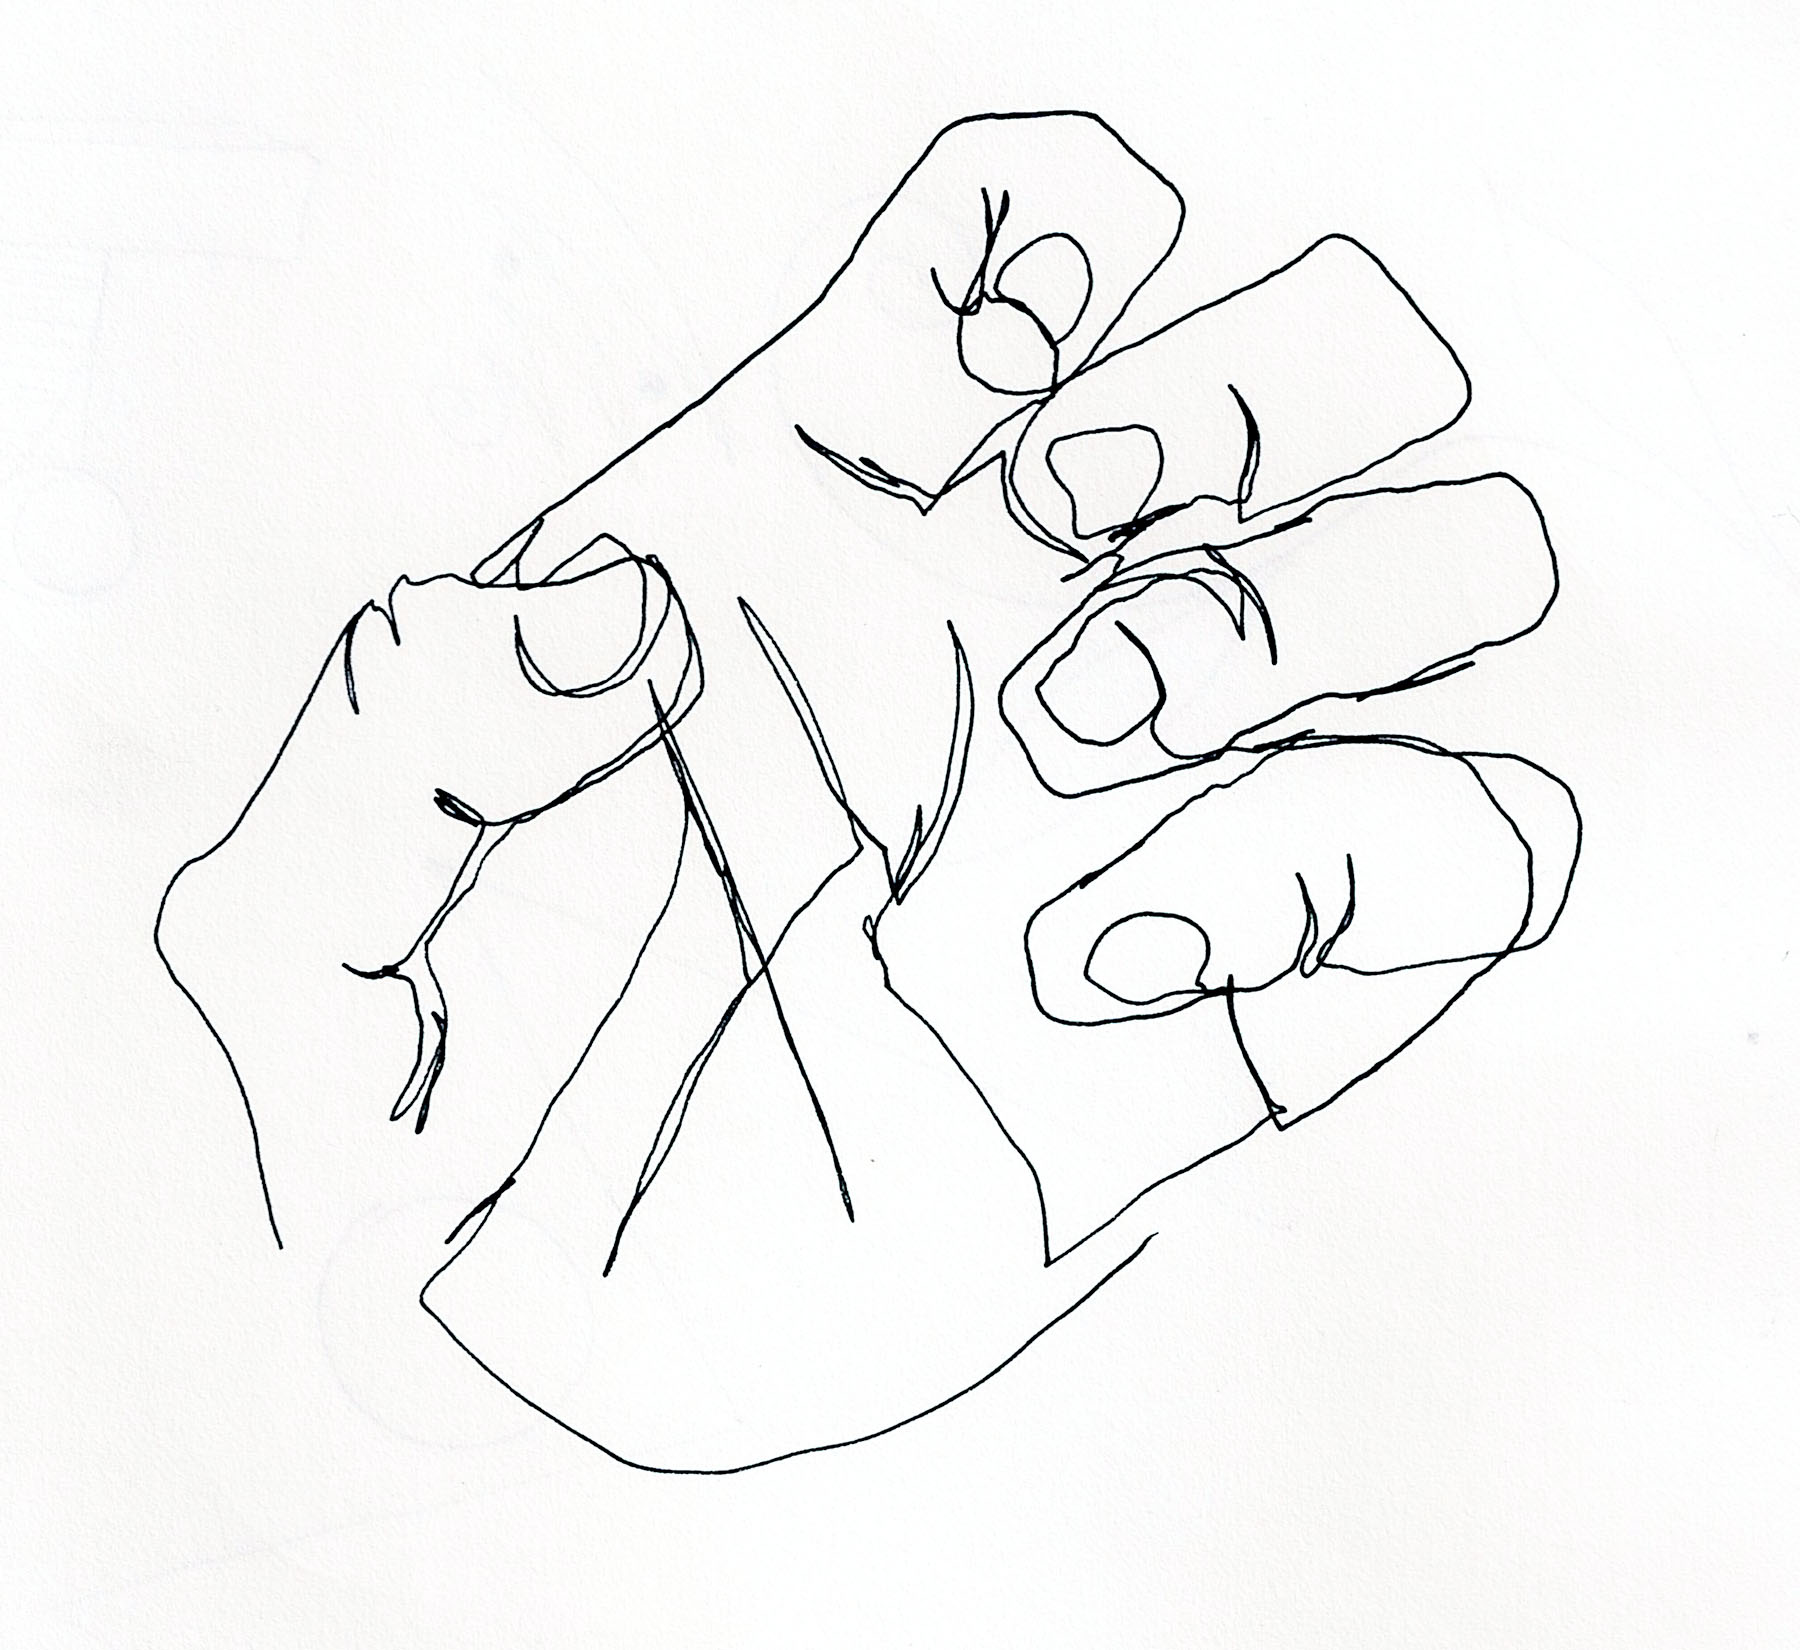 hand contour line drawing